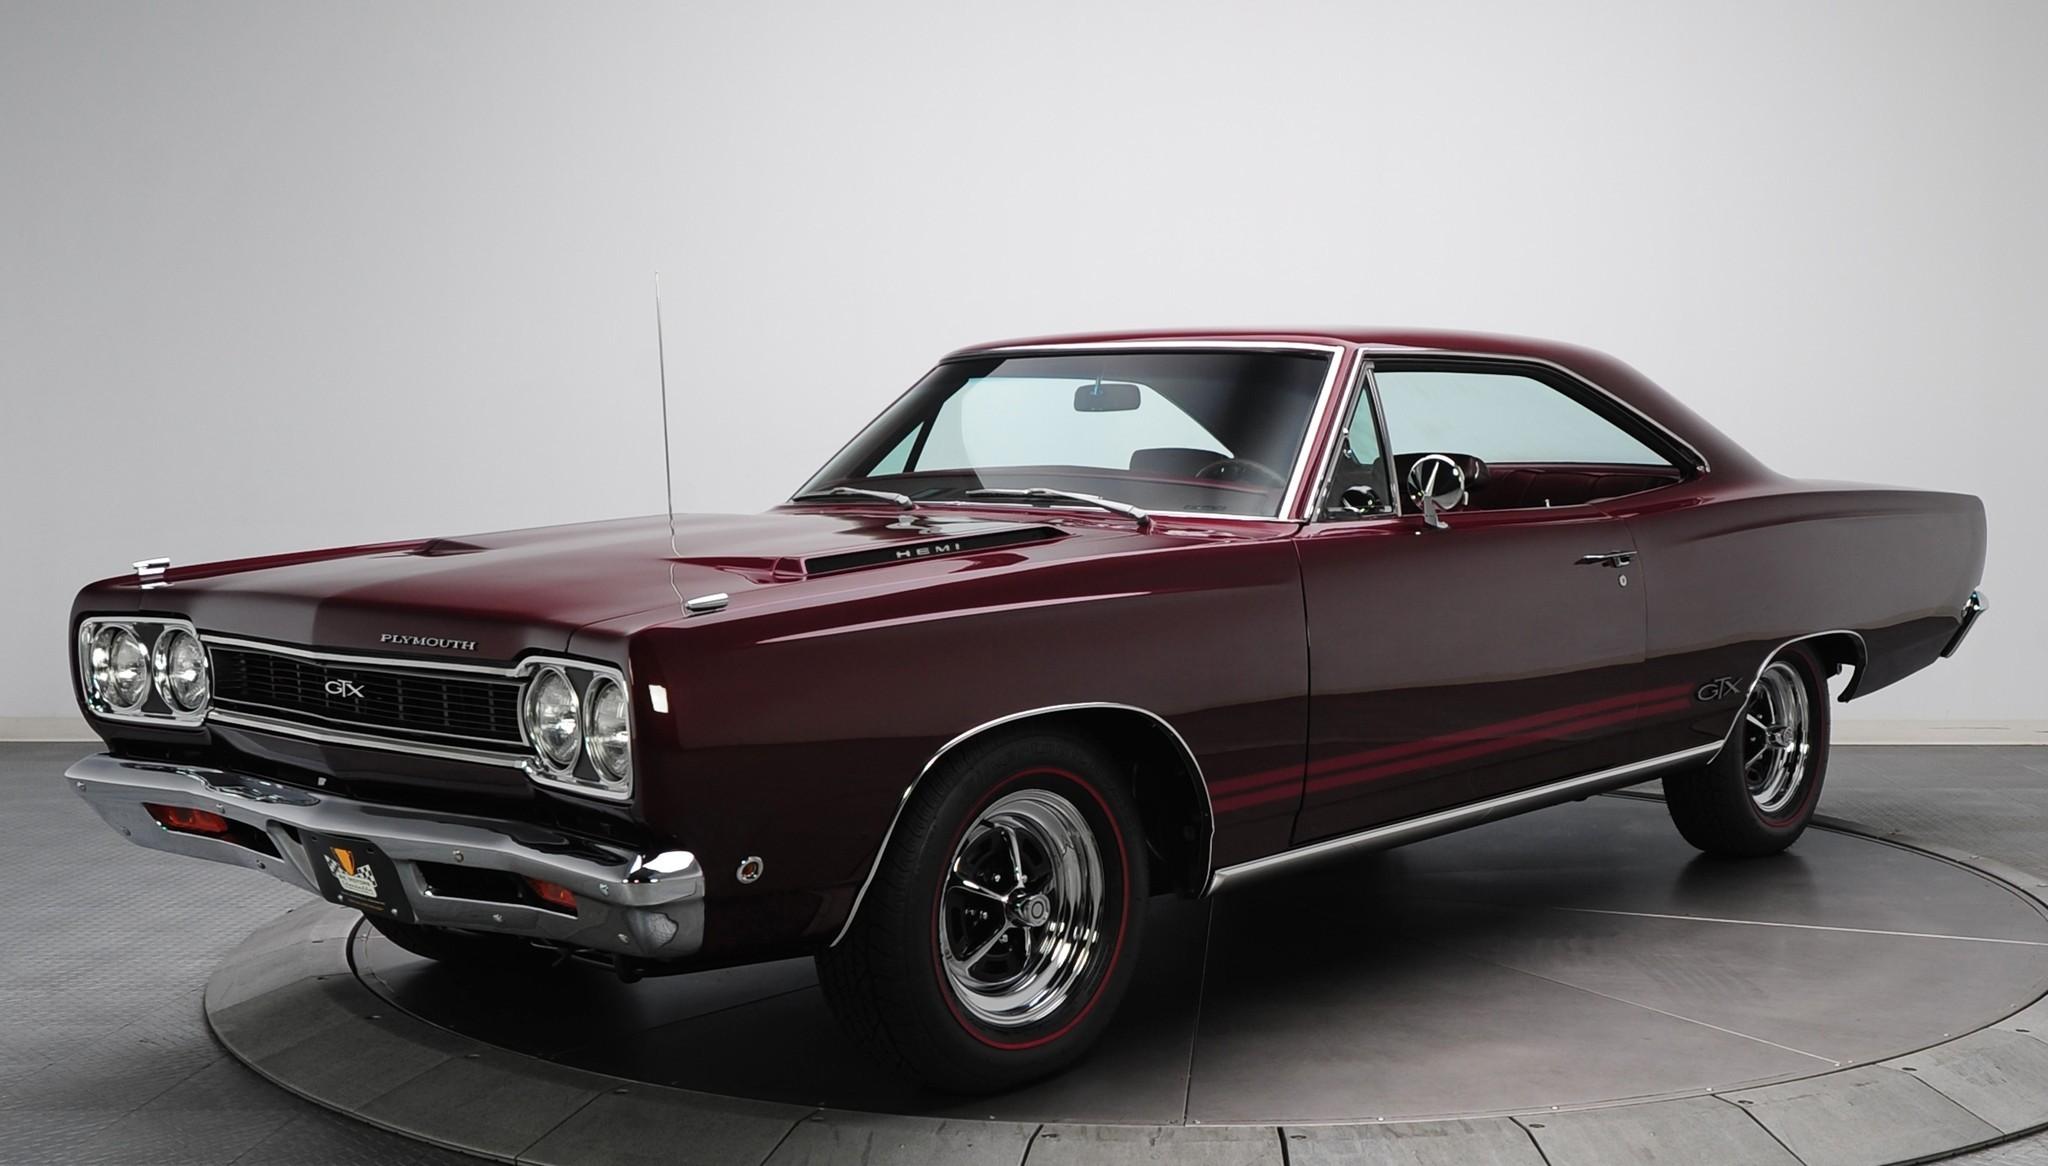 Download 2048x1166 Plymouth Gtx Side View, Classic, Cars